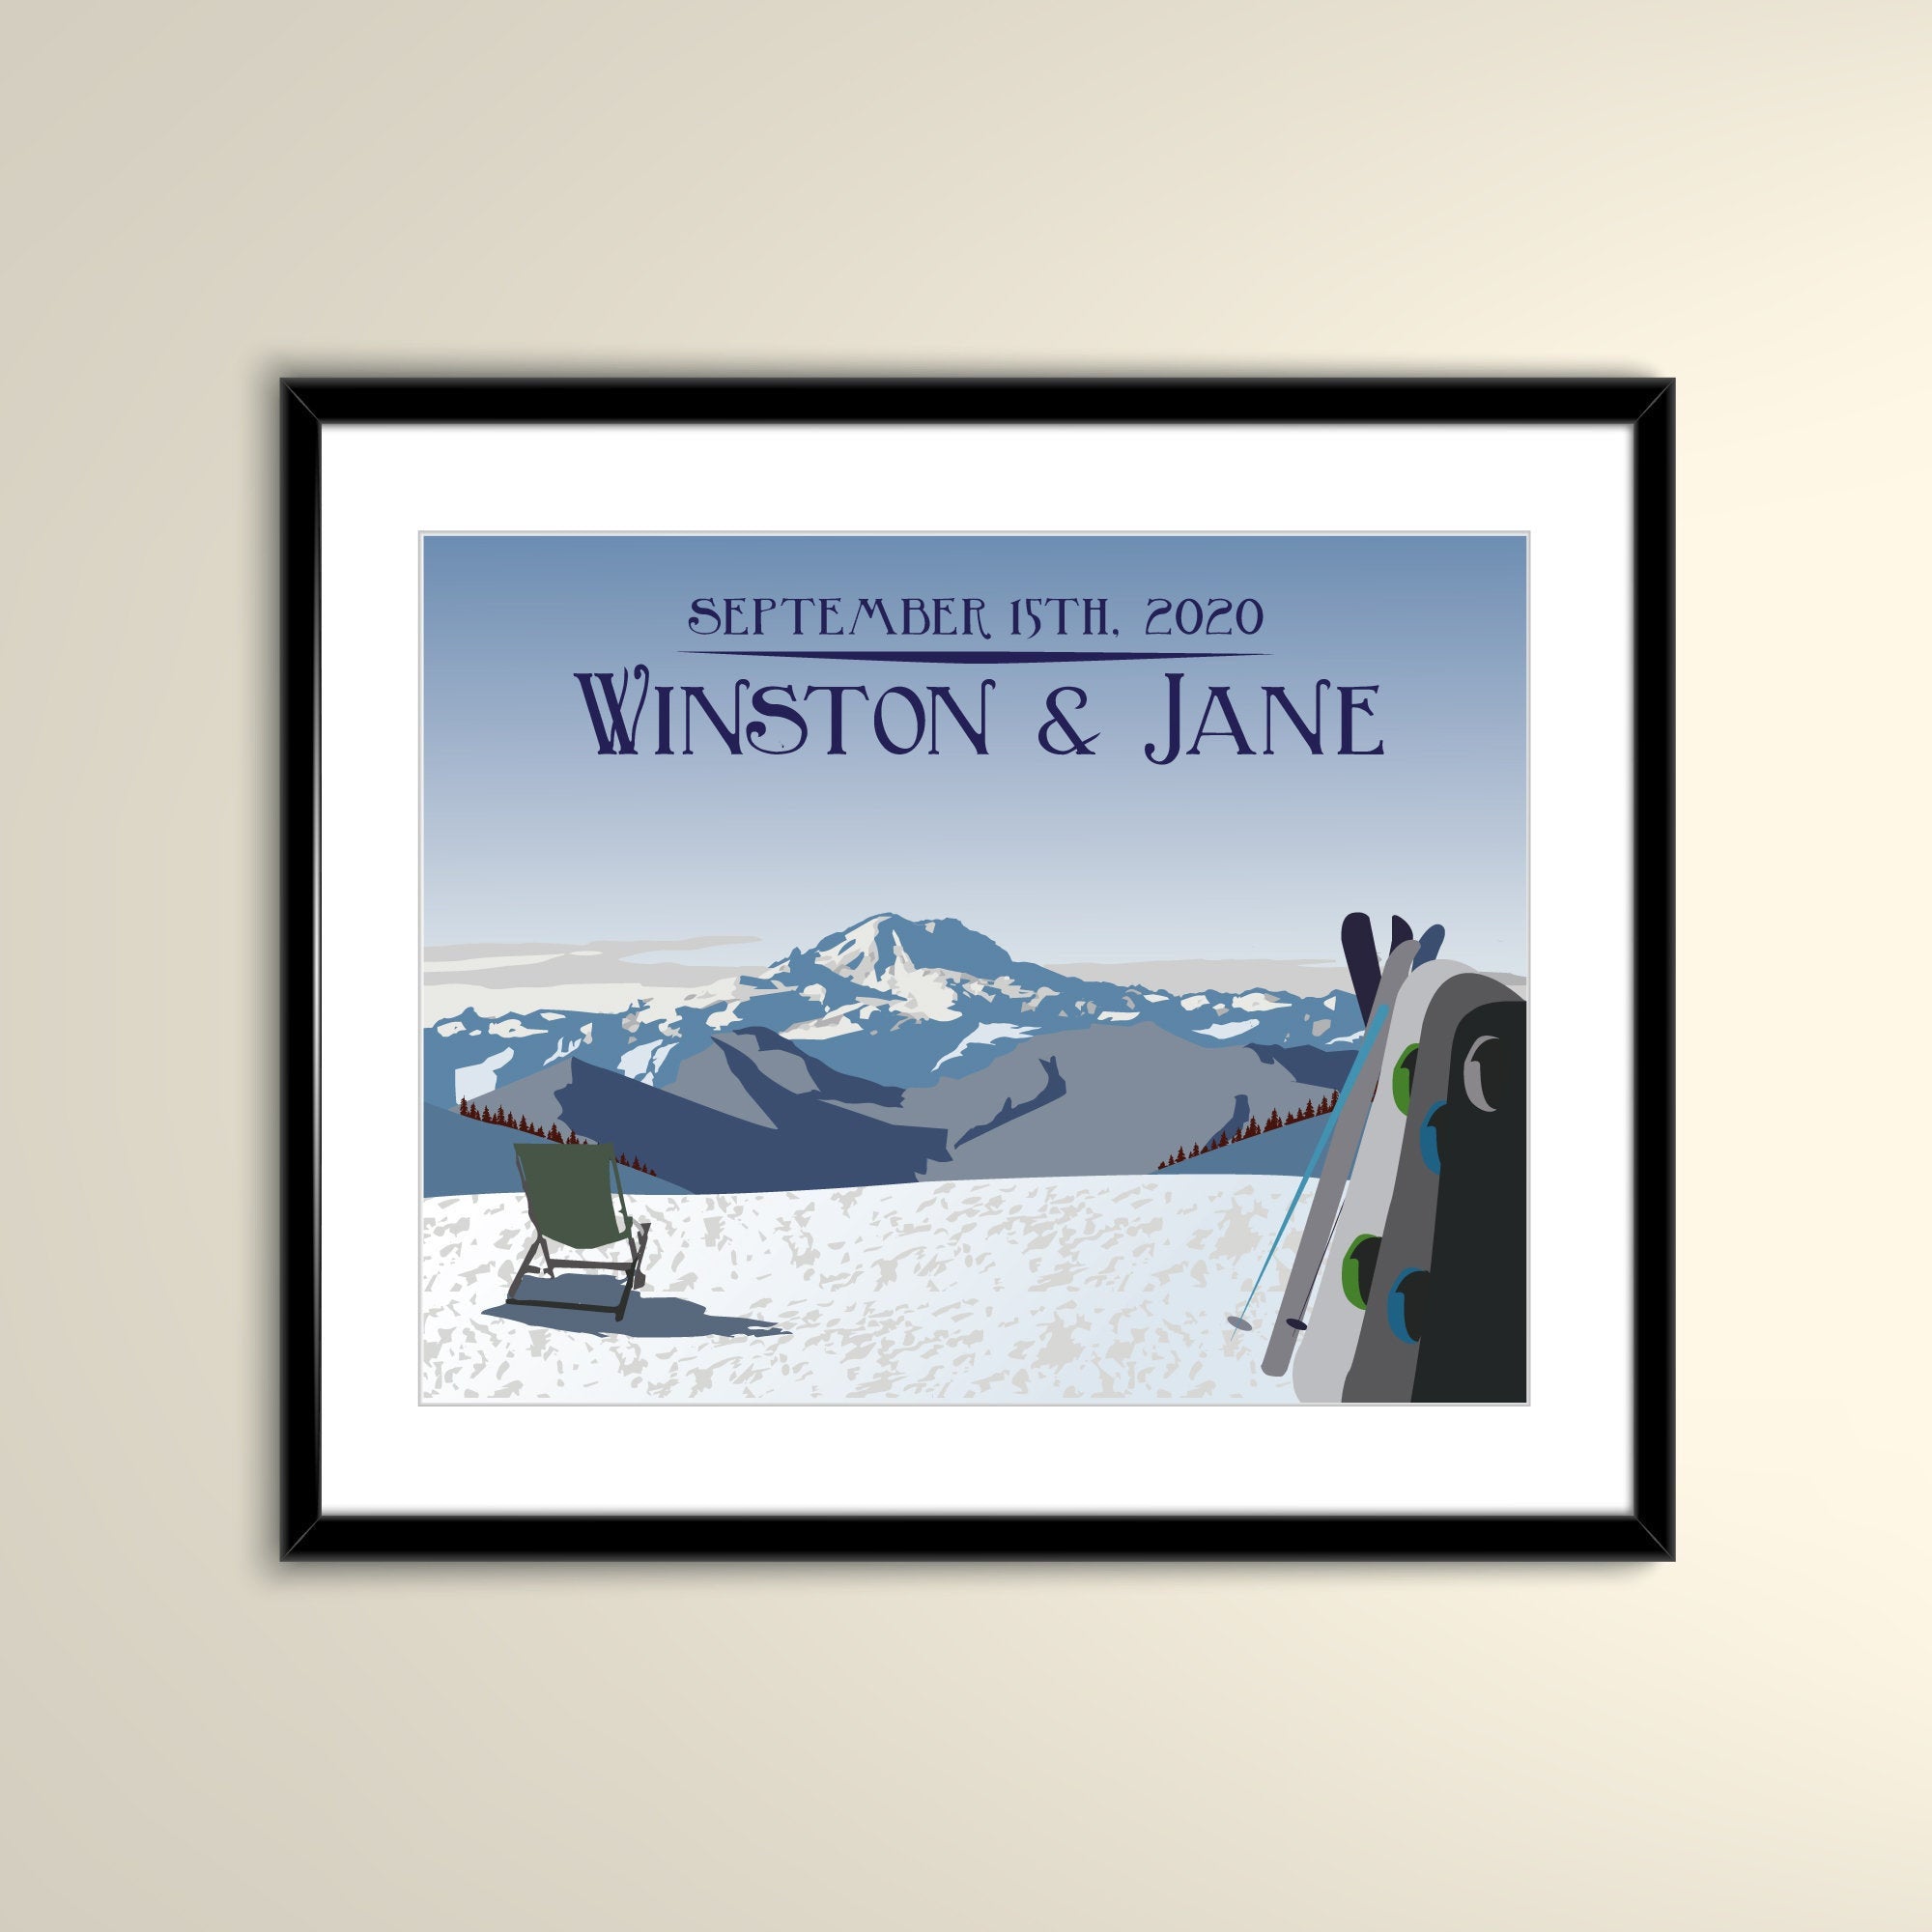 Crystal Mountain Washington Ski Resort - Travel 14x11 Poster - Personalized Wedding Poster (Frame not Included)